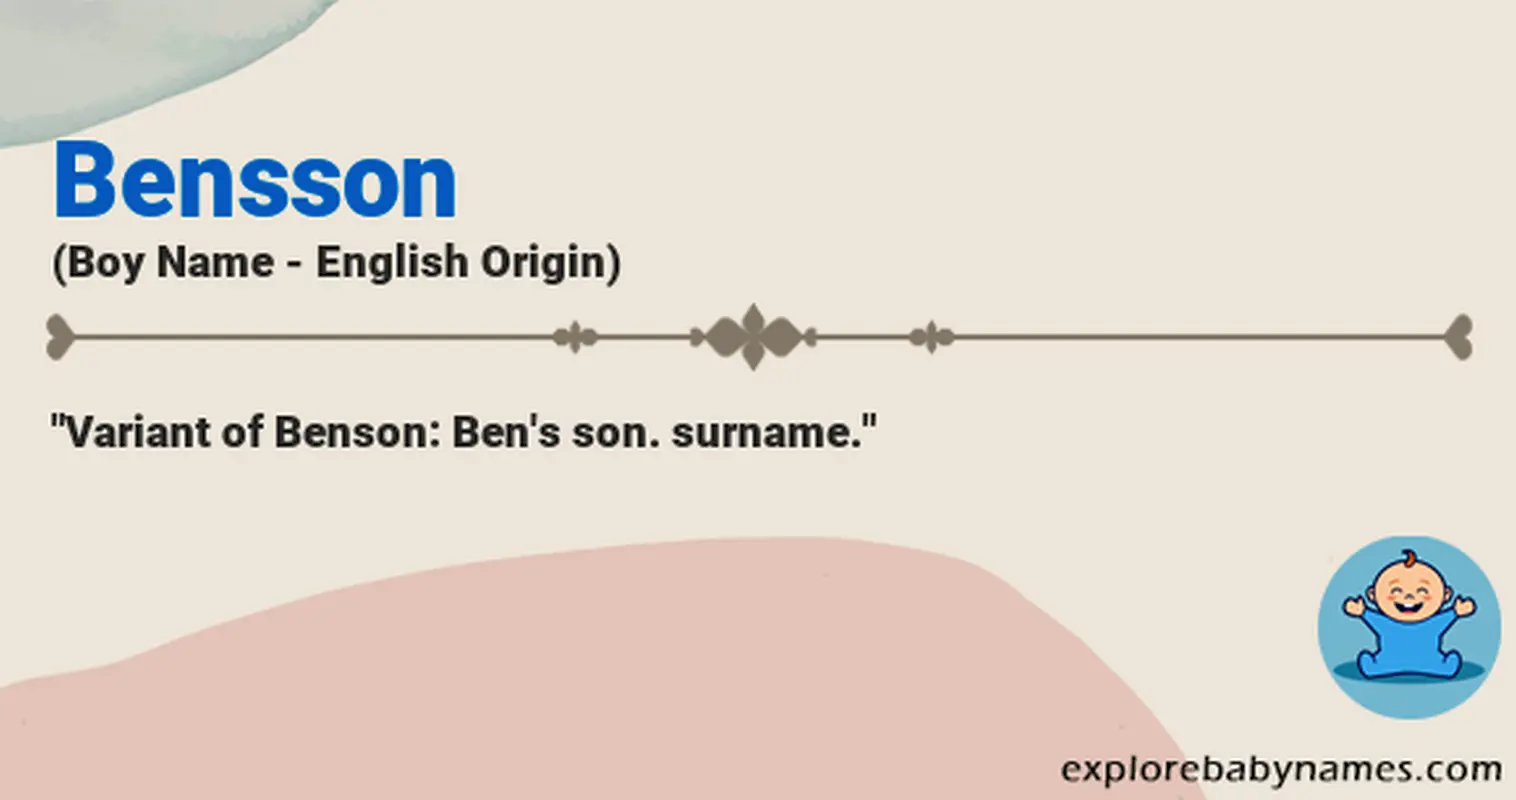 Meaning of Bensson